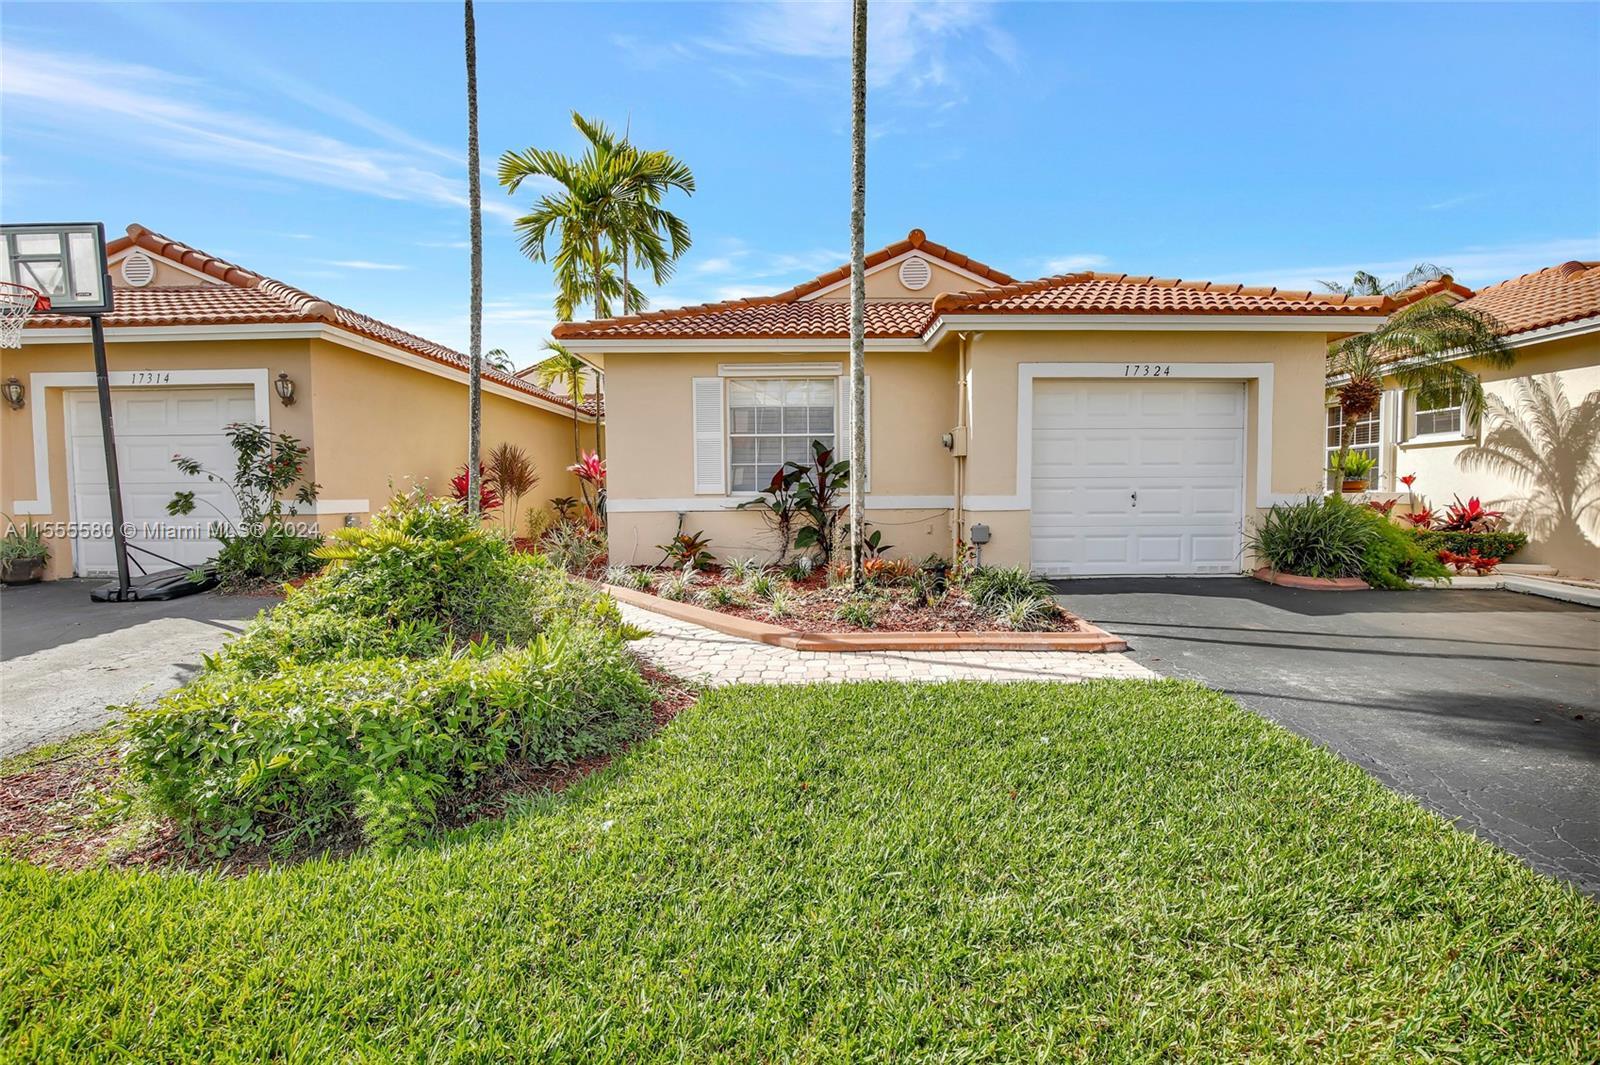 Photo of 17324 NW 7th St #17324 in Pembroke Pines, FL